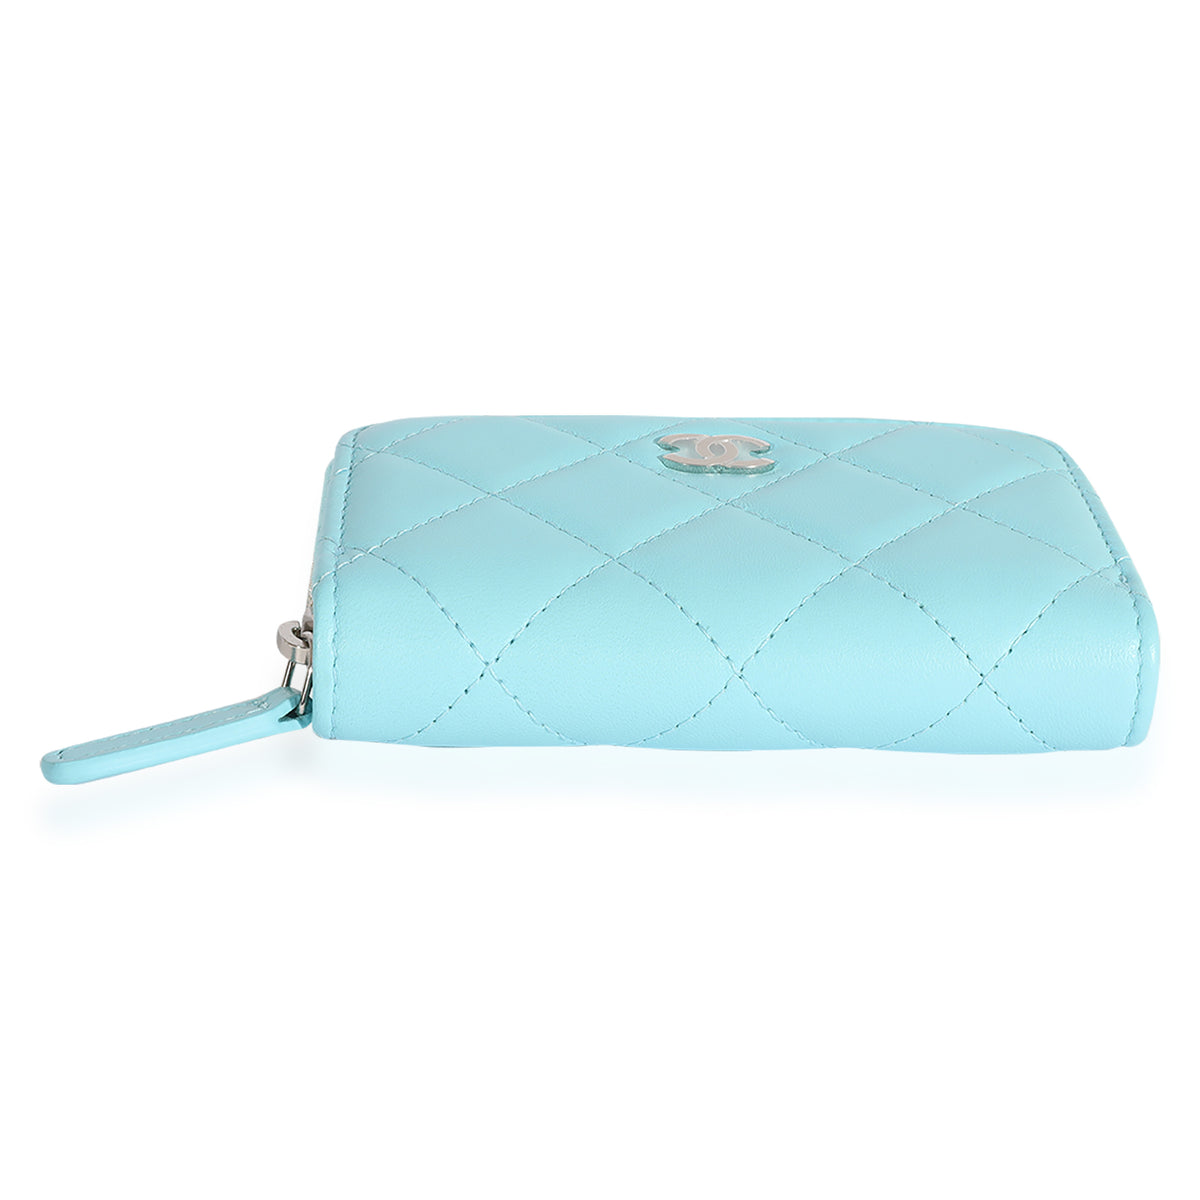 Chanel Blue Quilted Lambskin Leather Zippy Wallet – Italy Station